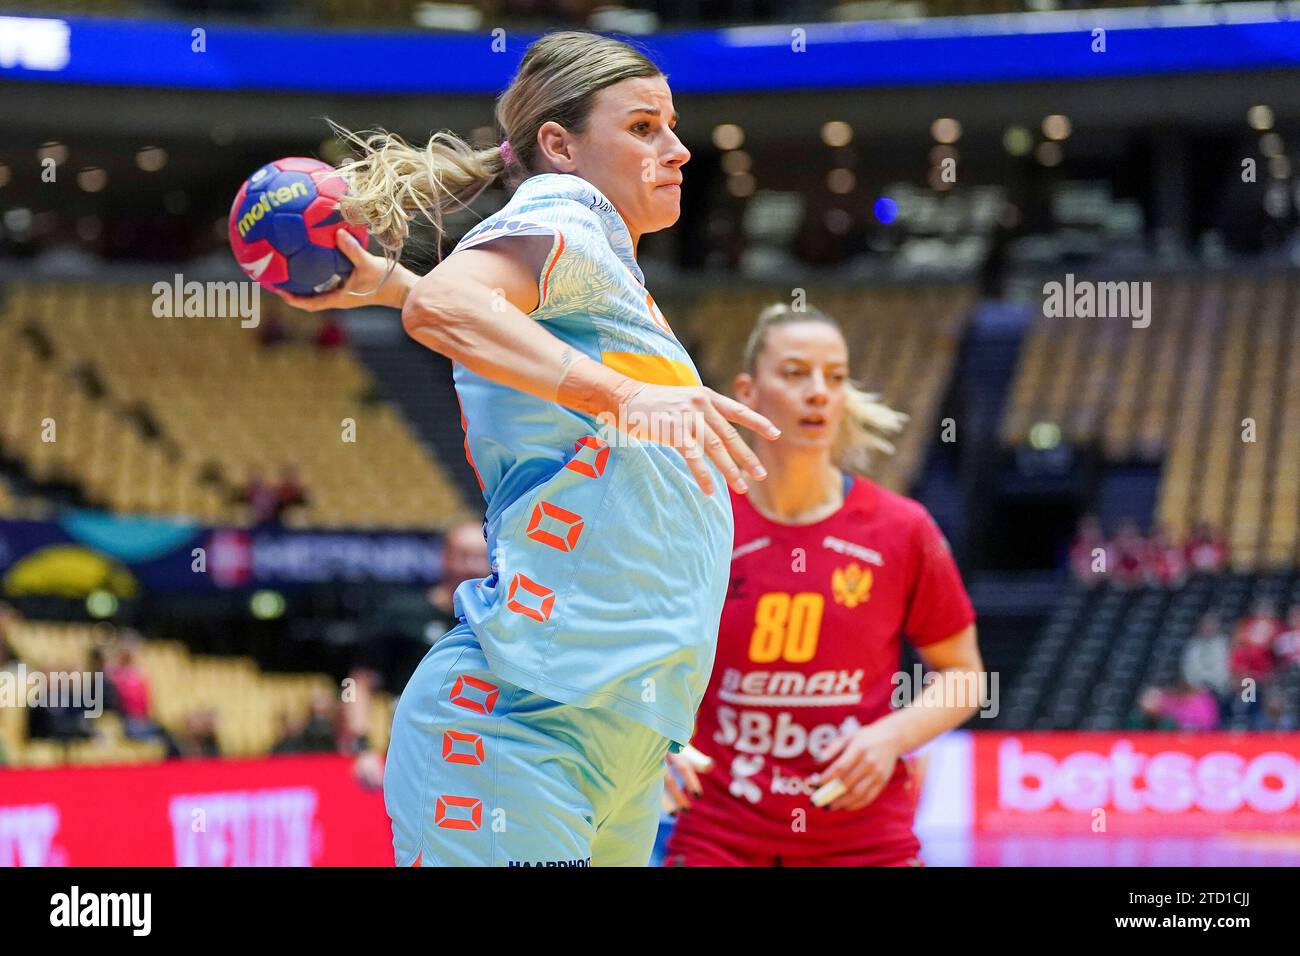 HERNING, DENMARK - DECEMBER 15: Angela Malestein of the Netherlands during the 26th IHF Women's World Championship Handball Final Round, 5-8 place match between Montenegro and Netherlands at Jyske Bank Boxen on December 15, 2023 in Herning, Denmark (Photo by Henk Seppen/Orange Pictures) Stock Photo